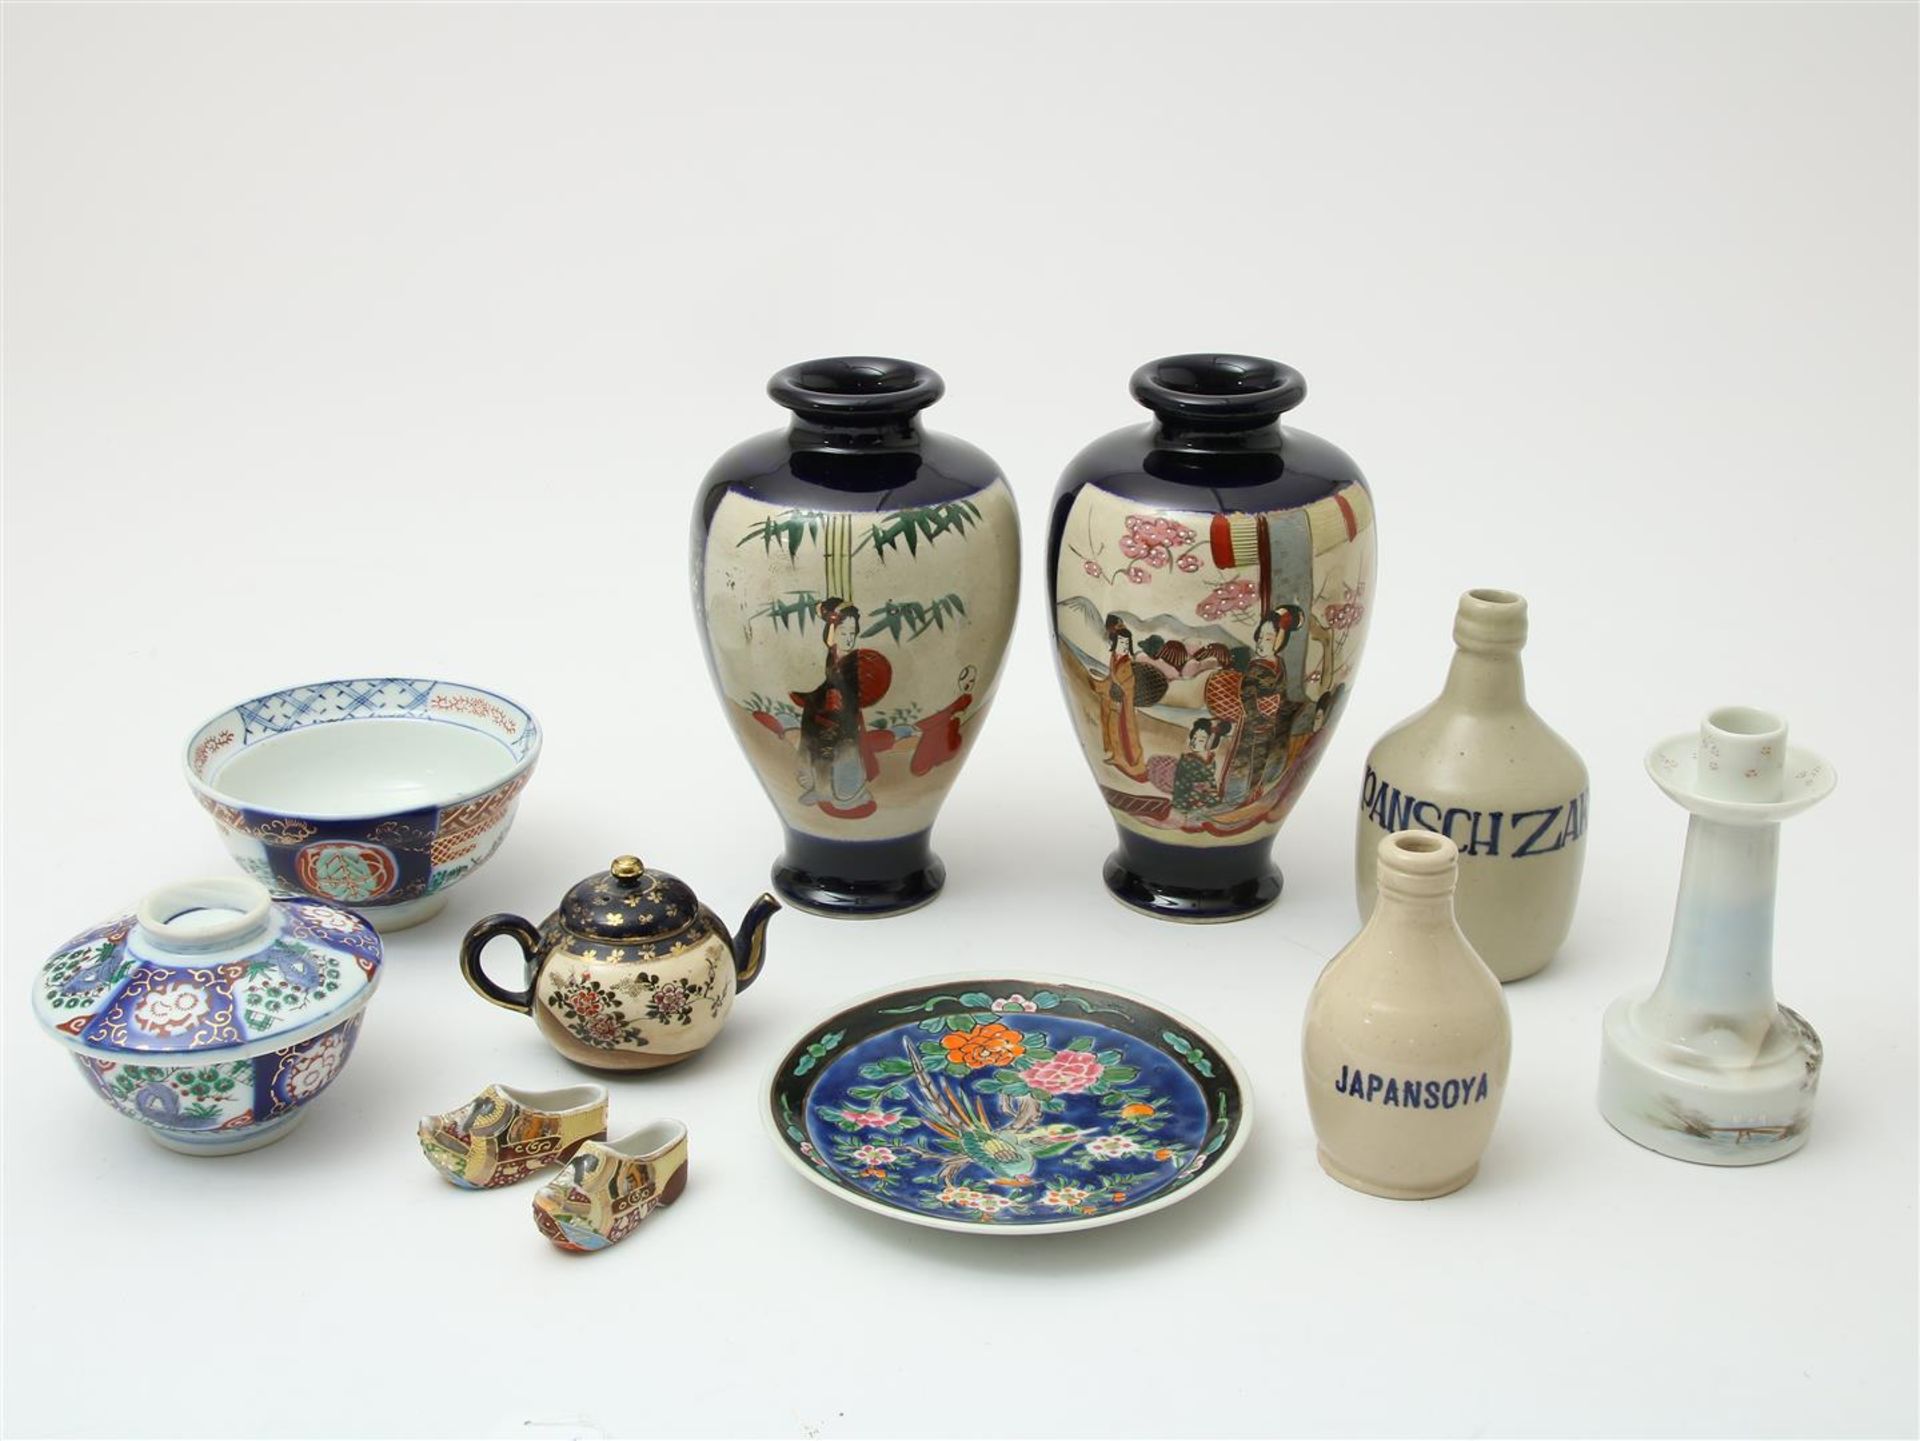 Set of Satsuma vases with decor of Geishas in panels, two imari bowls, one under lid, teapot,